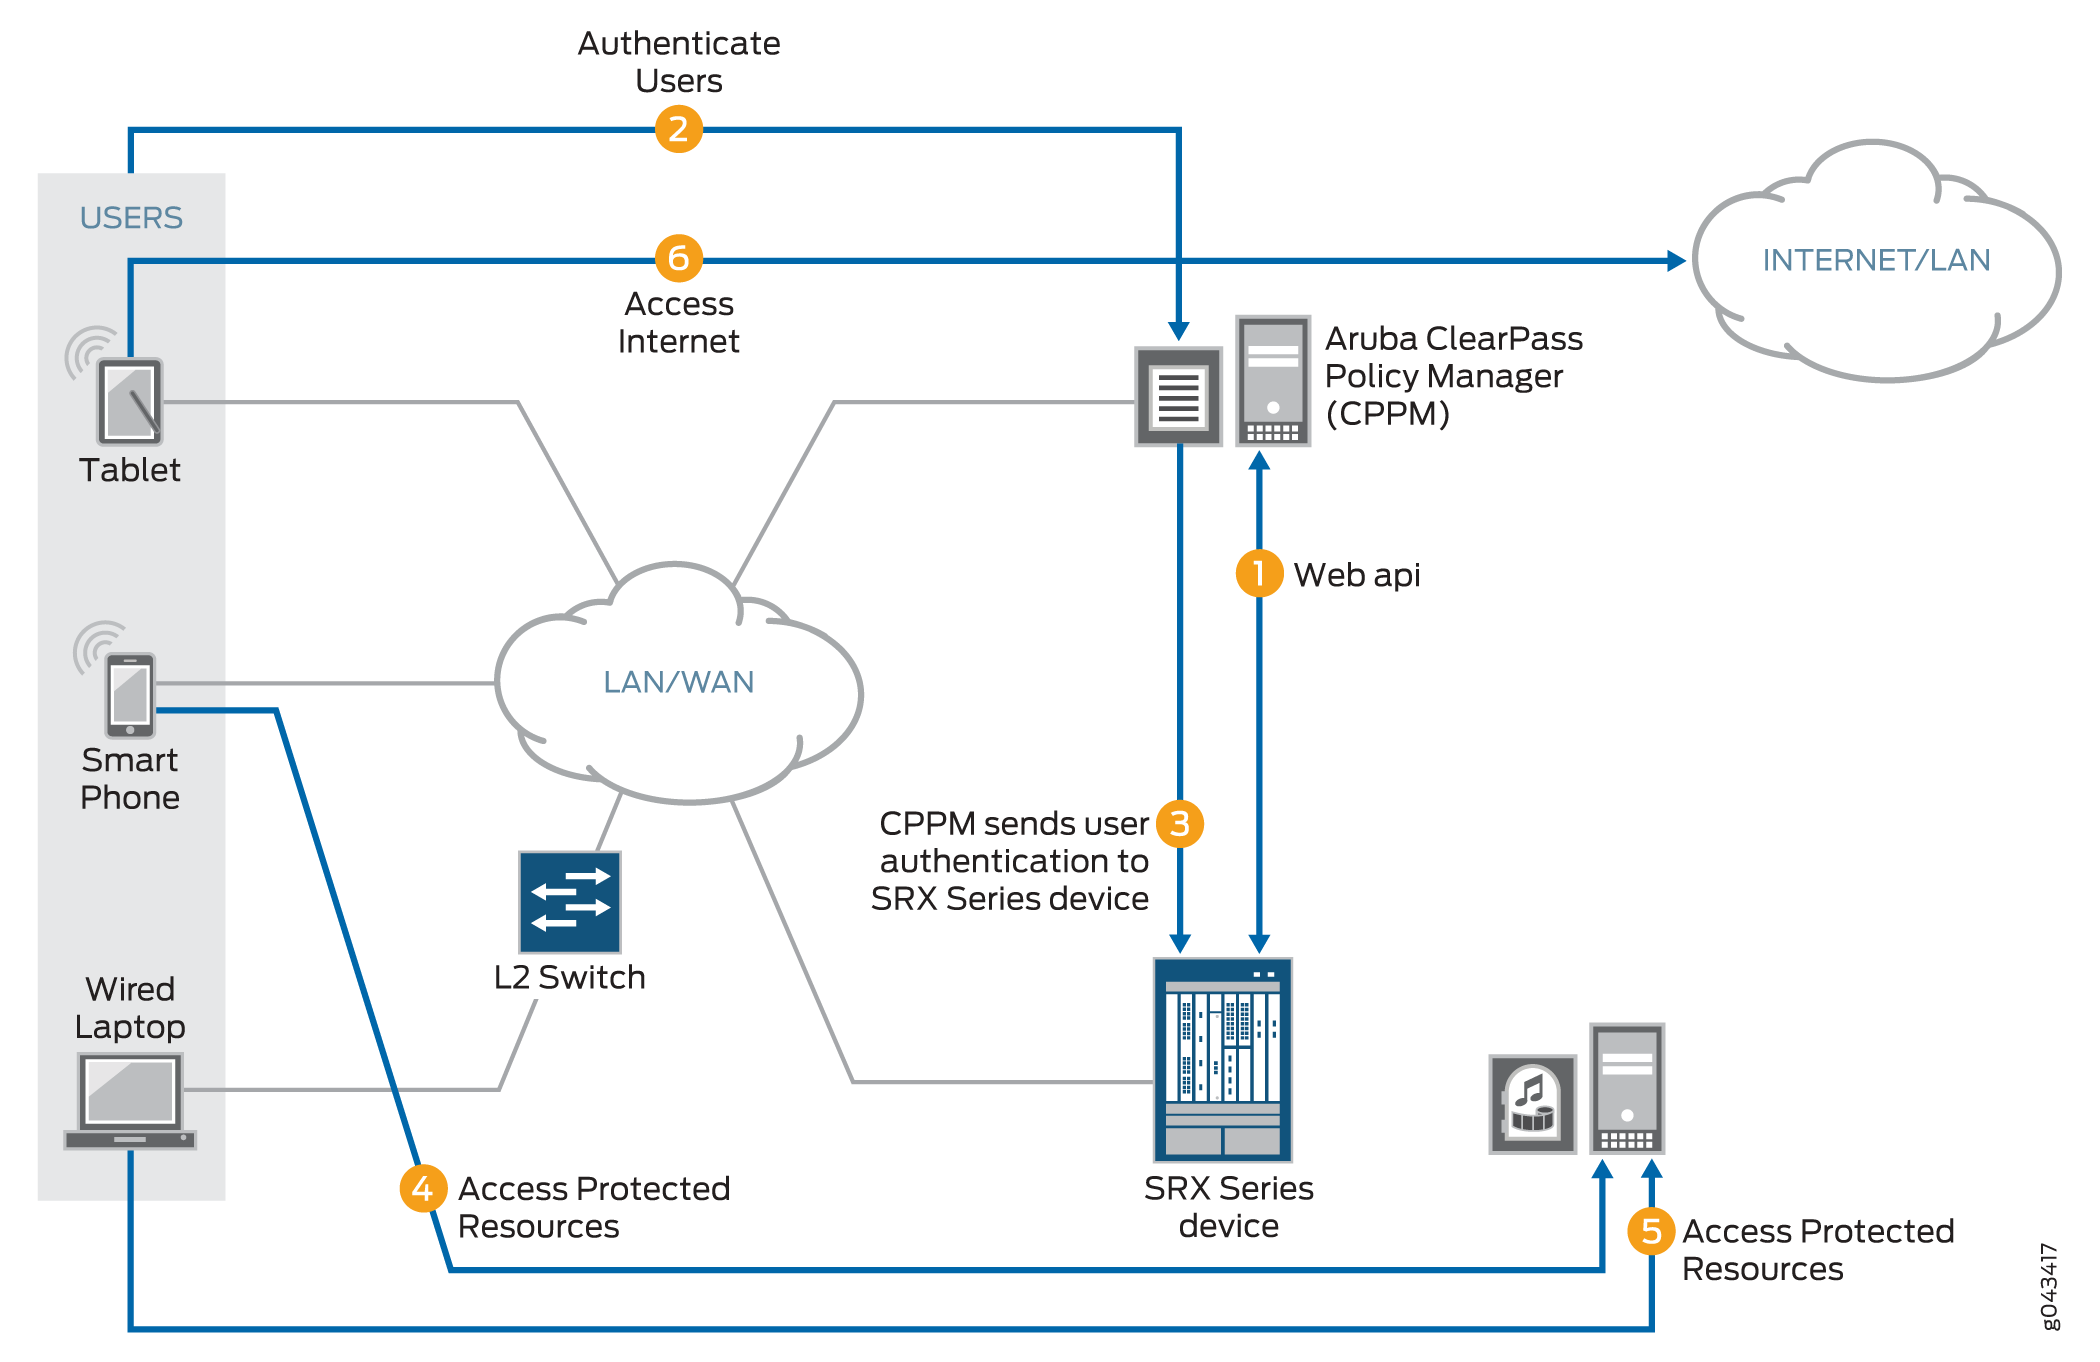 ClearPass and SRX Series Device Communication and User Authentication Process